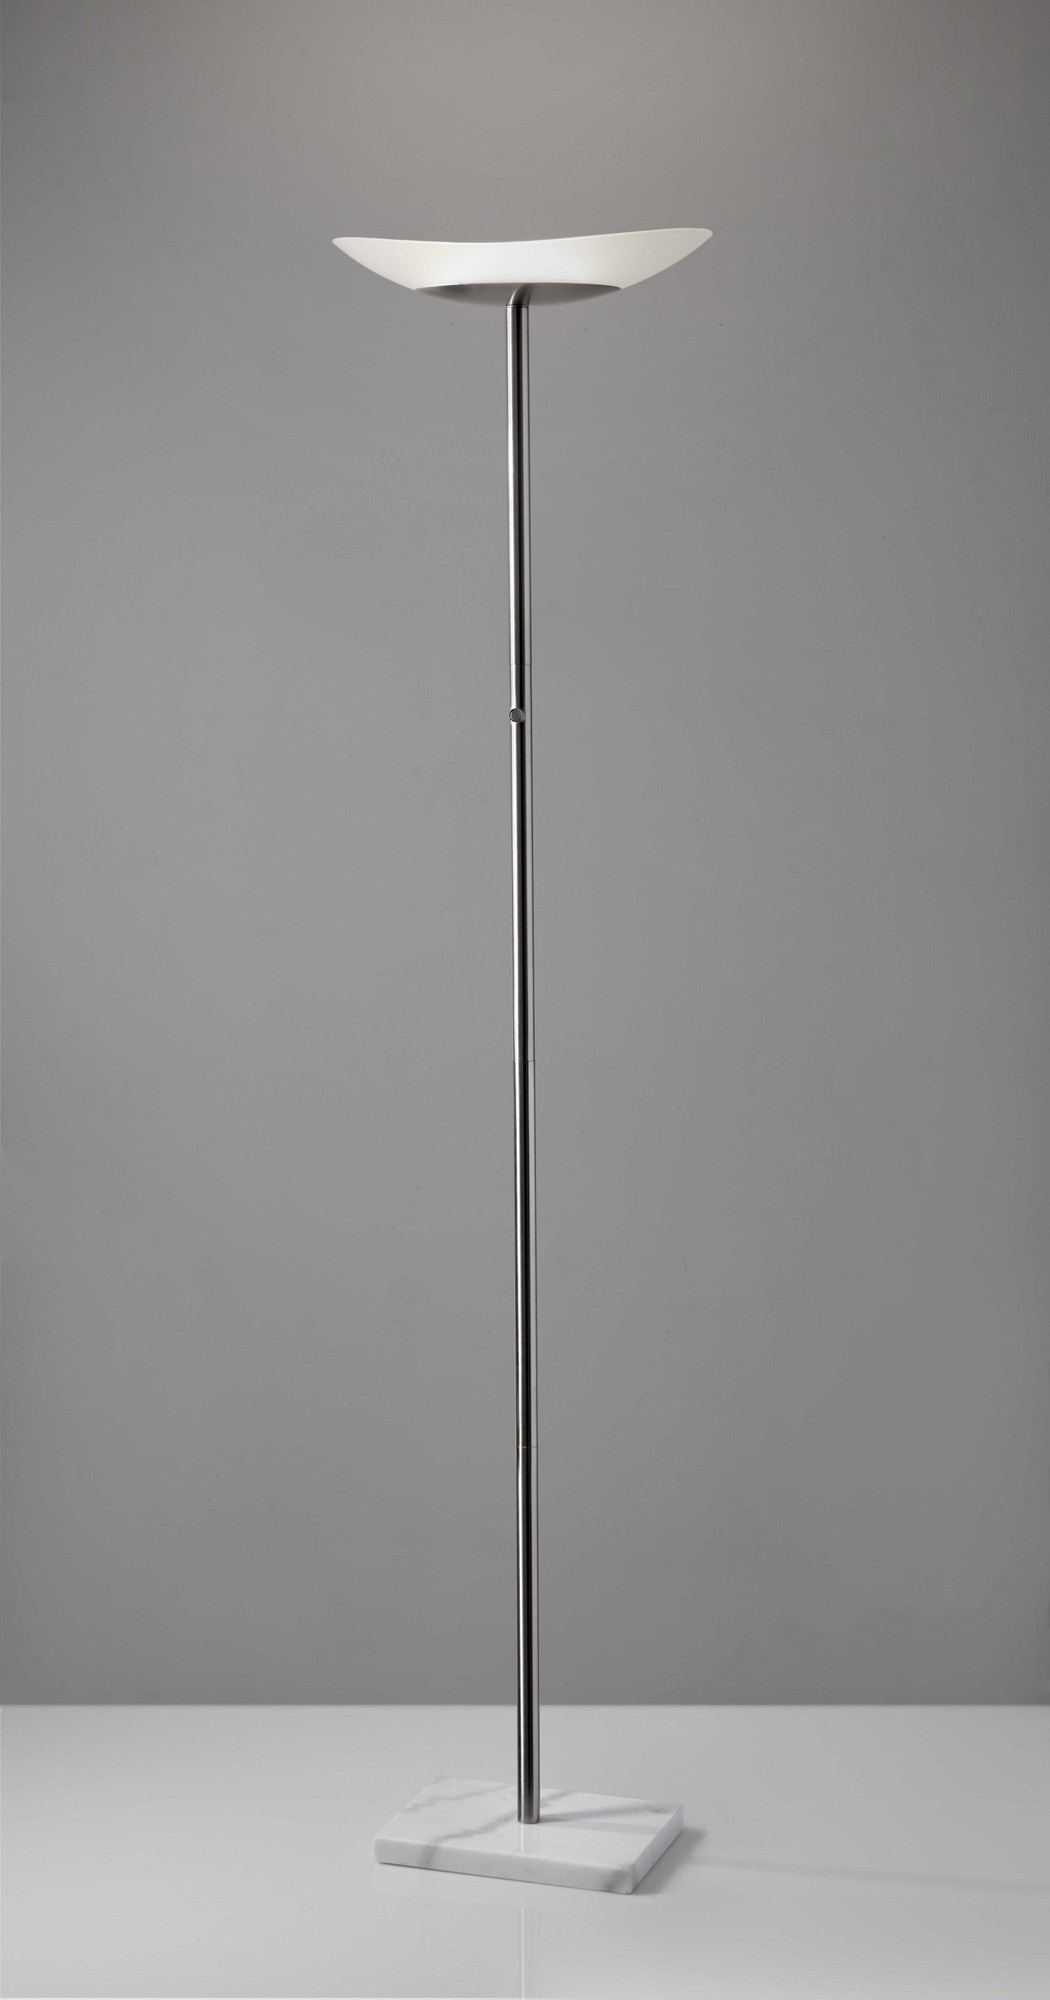 16" X 16" X 71" Brushed steel Metal LED Torchiere